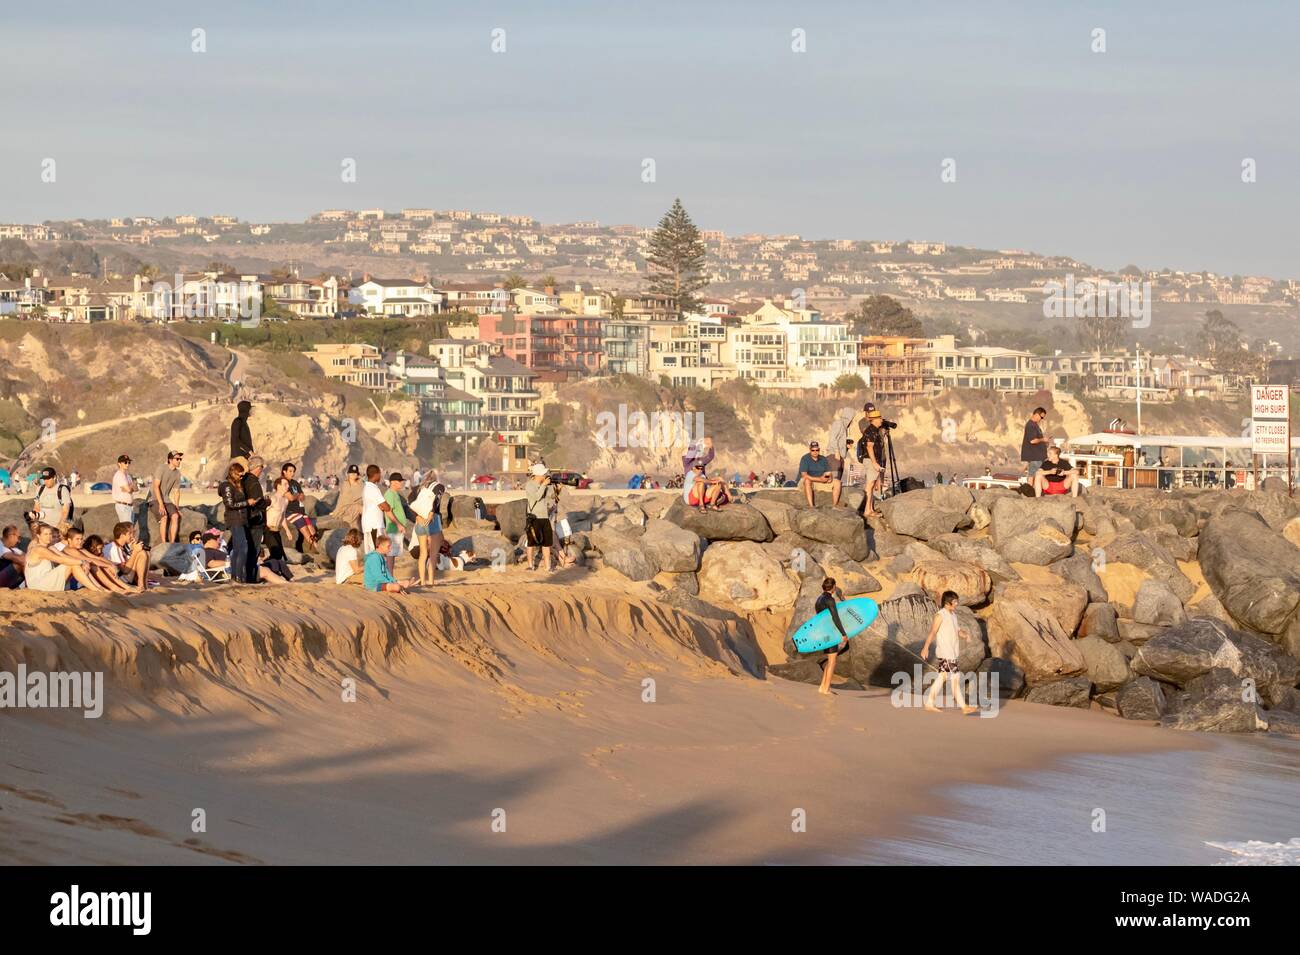 Spectators at The Wedge in Newport Beach, California watching people bodyboarding and surfing Stock Photo